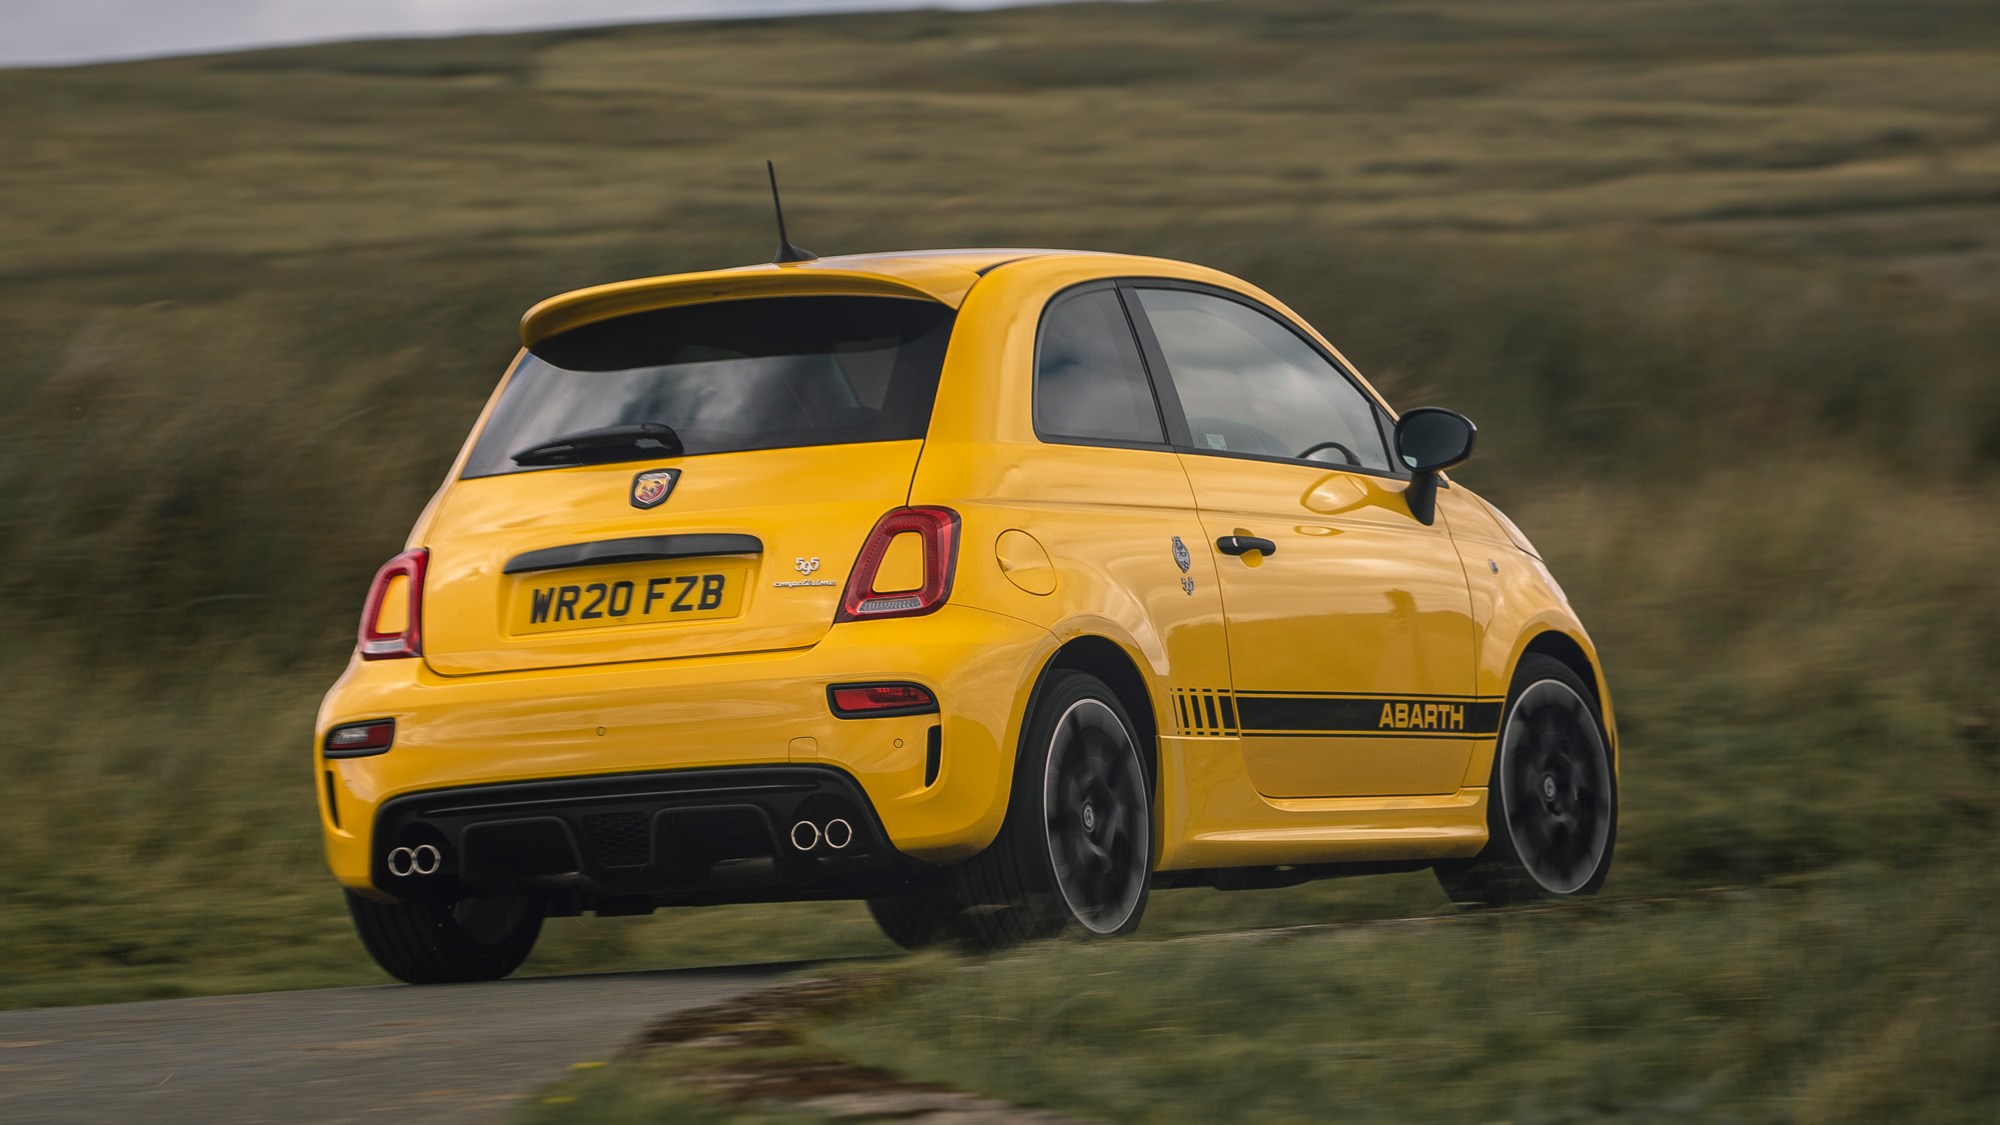 2022 ABARTH 595 COMPETIZIONE - LET'S PLAY AGAIN